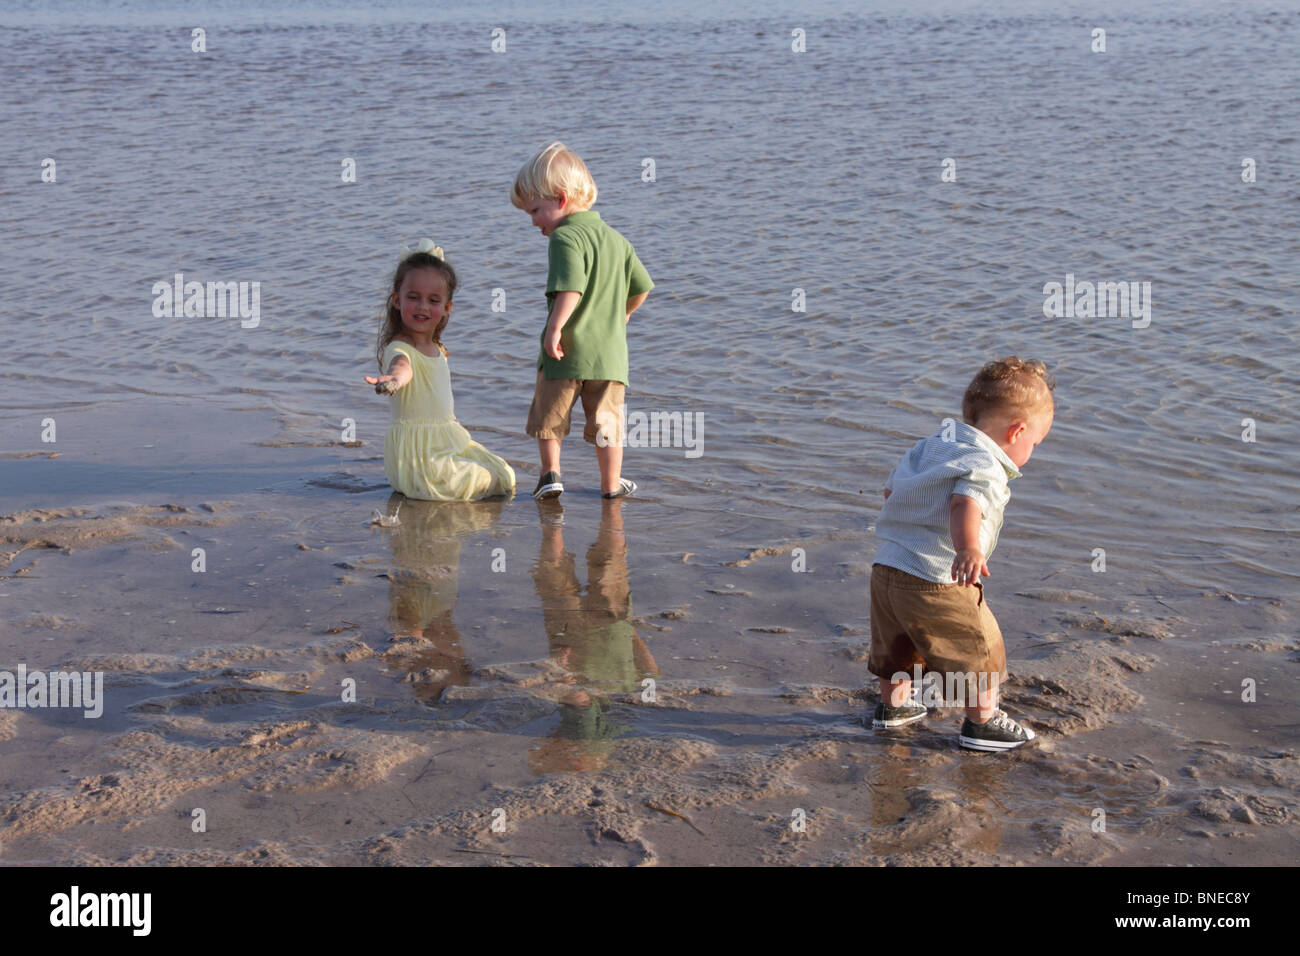 Children Playing in the Sand on the Beach Stock Photo